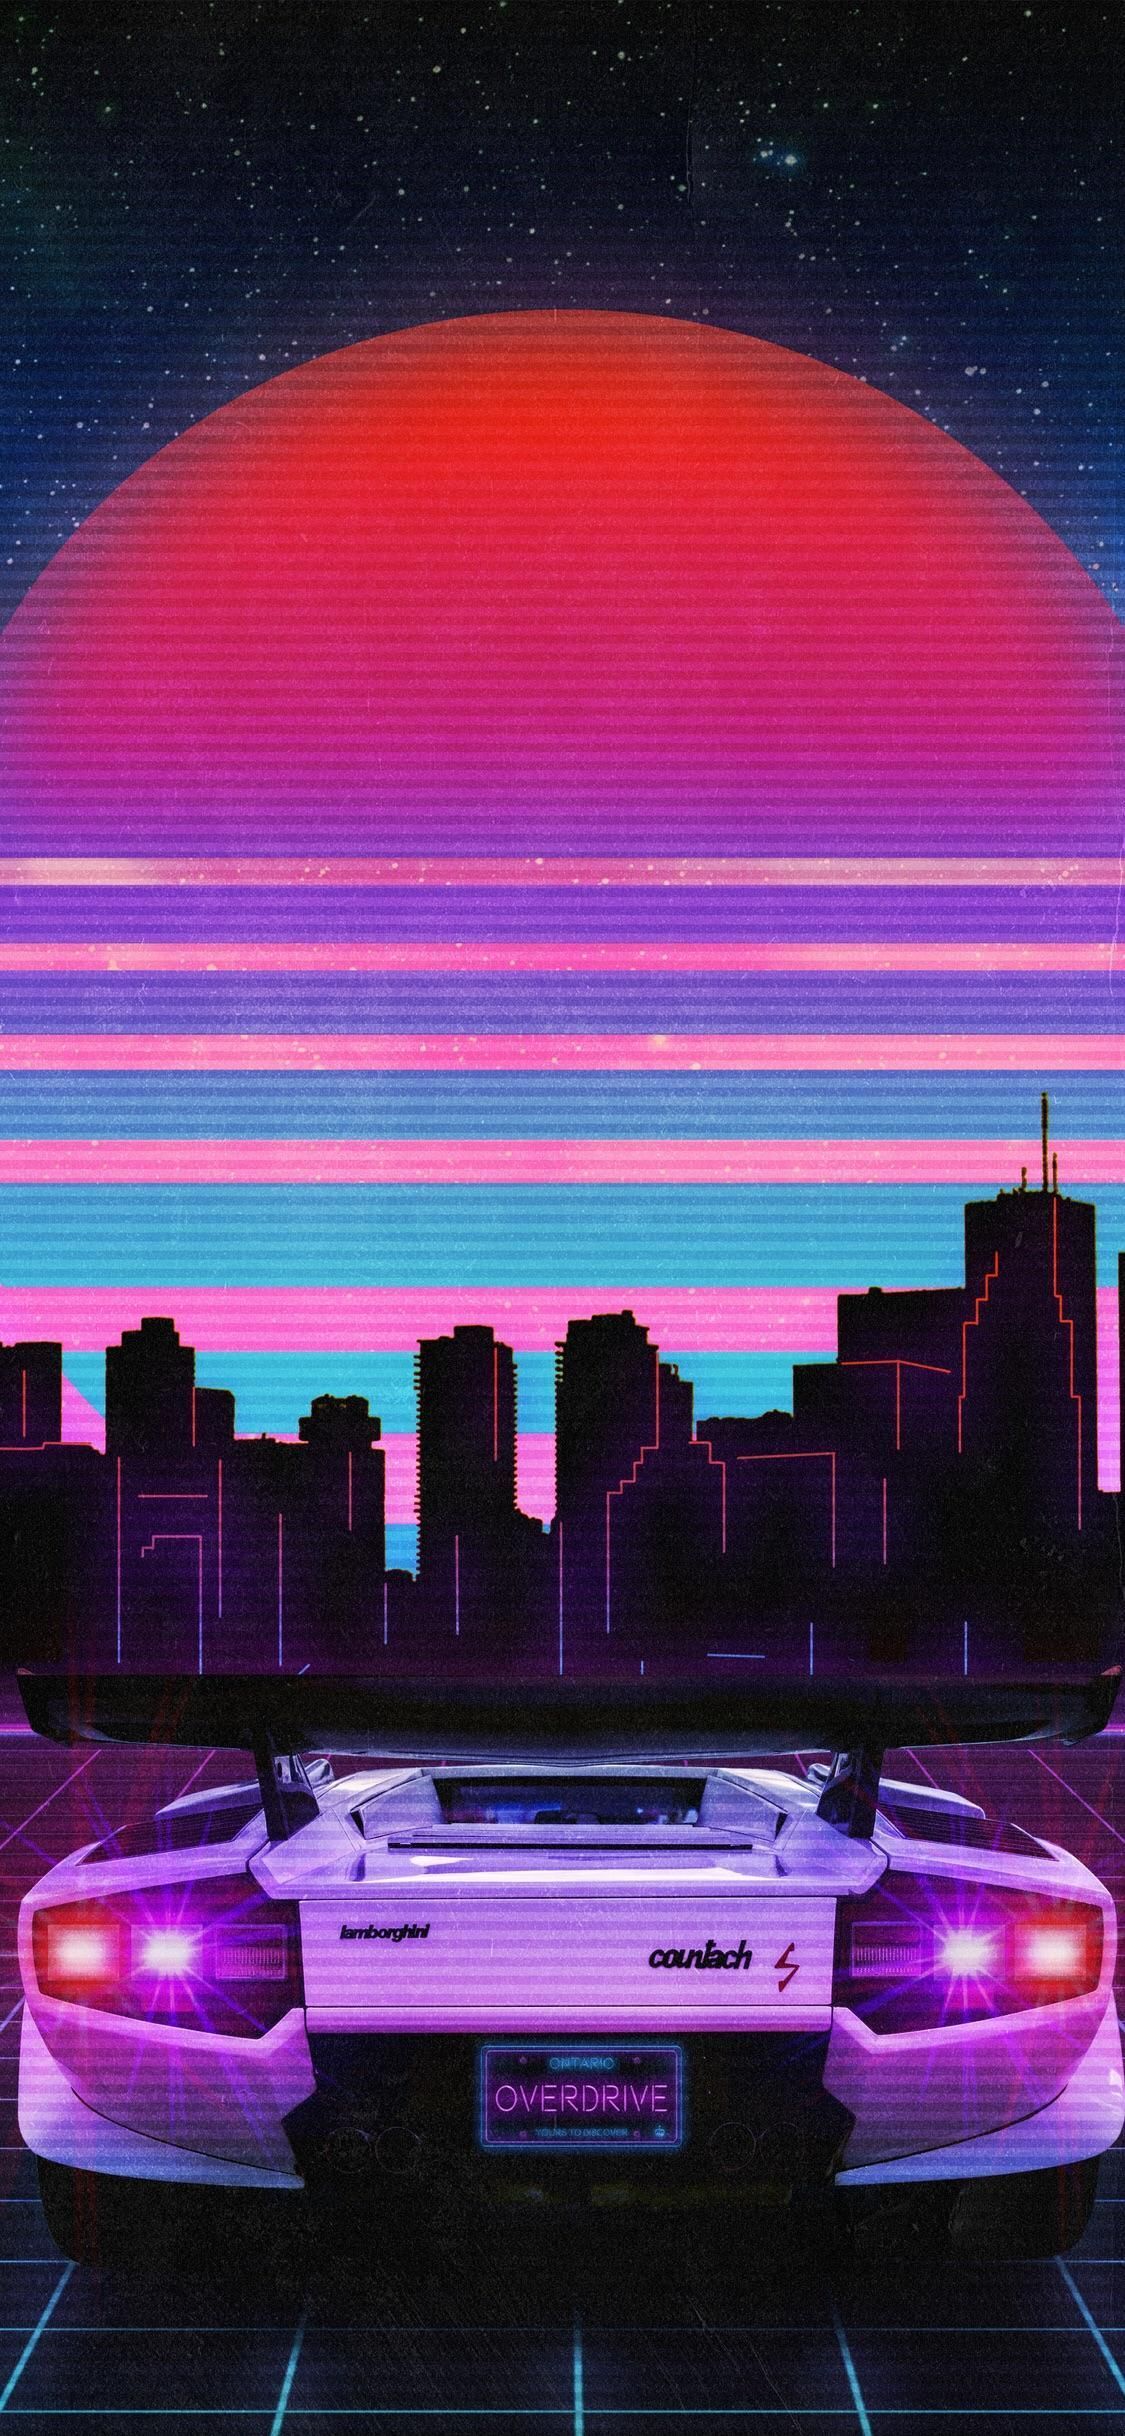 A car is parked in front of the city - Cars, synthwave